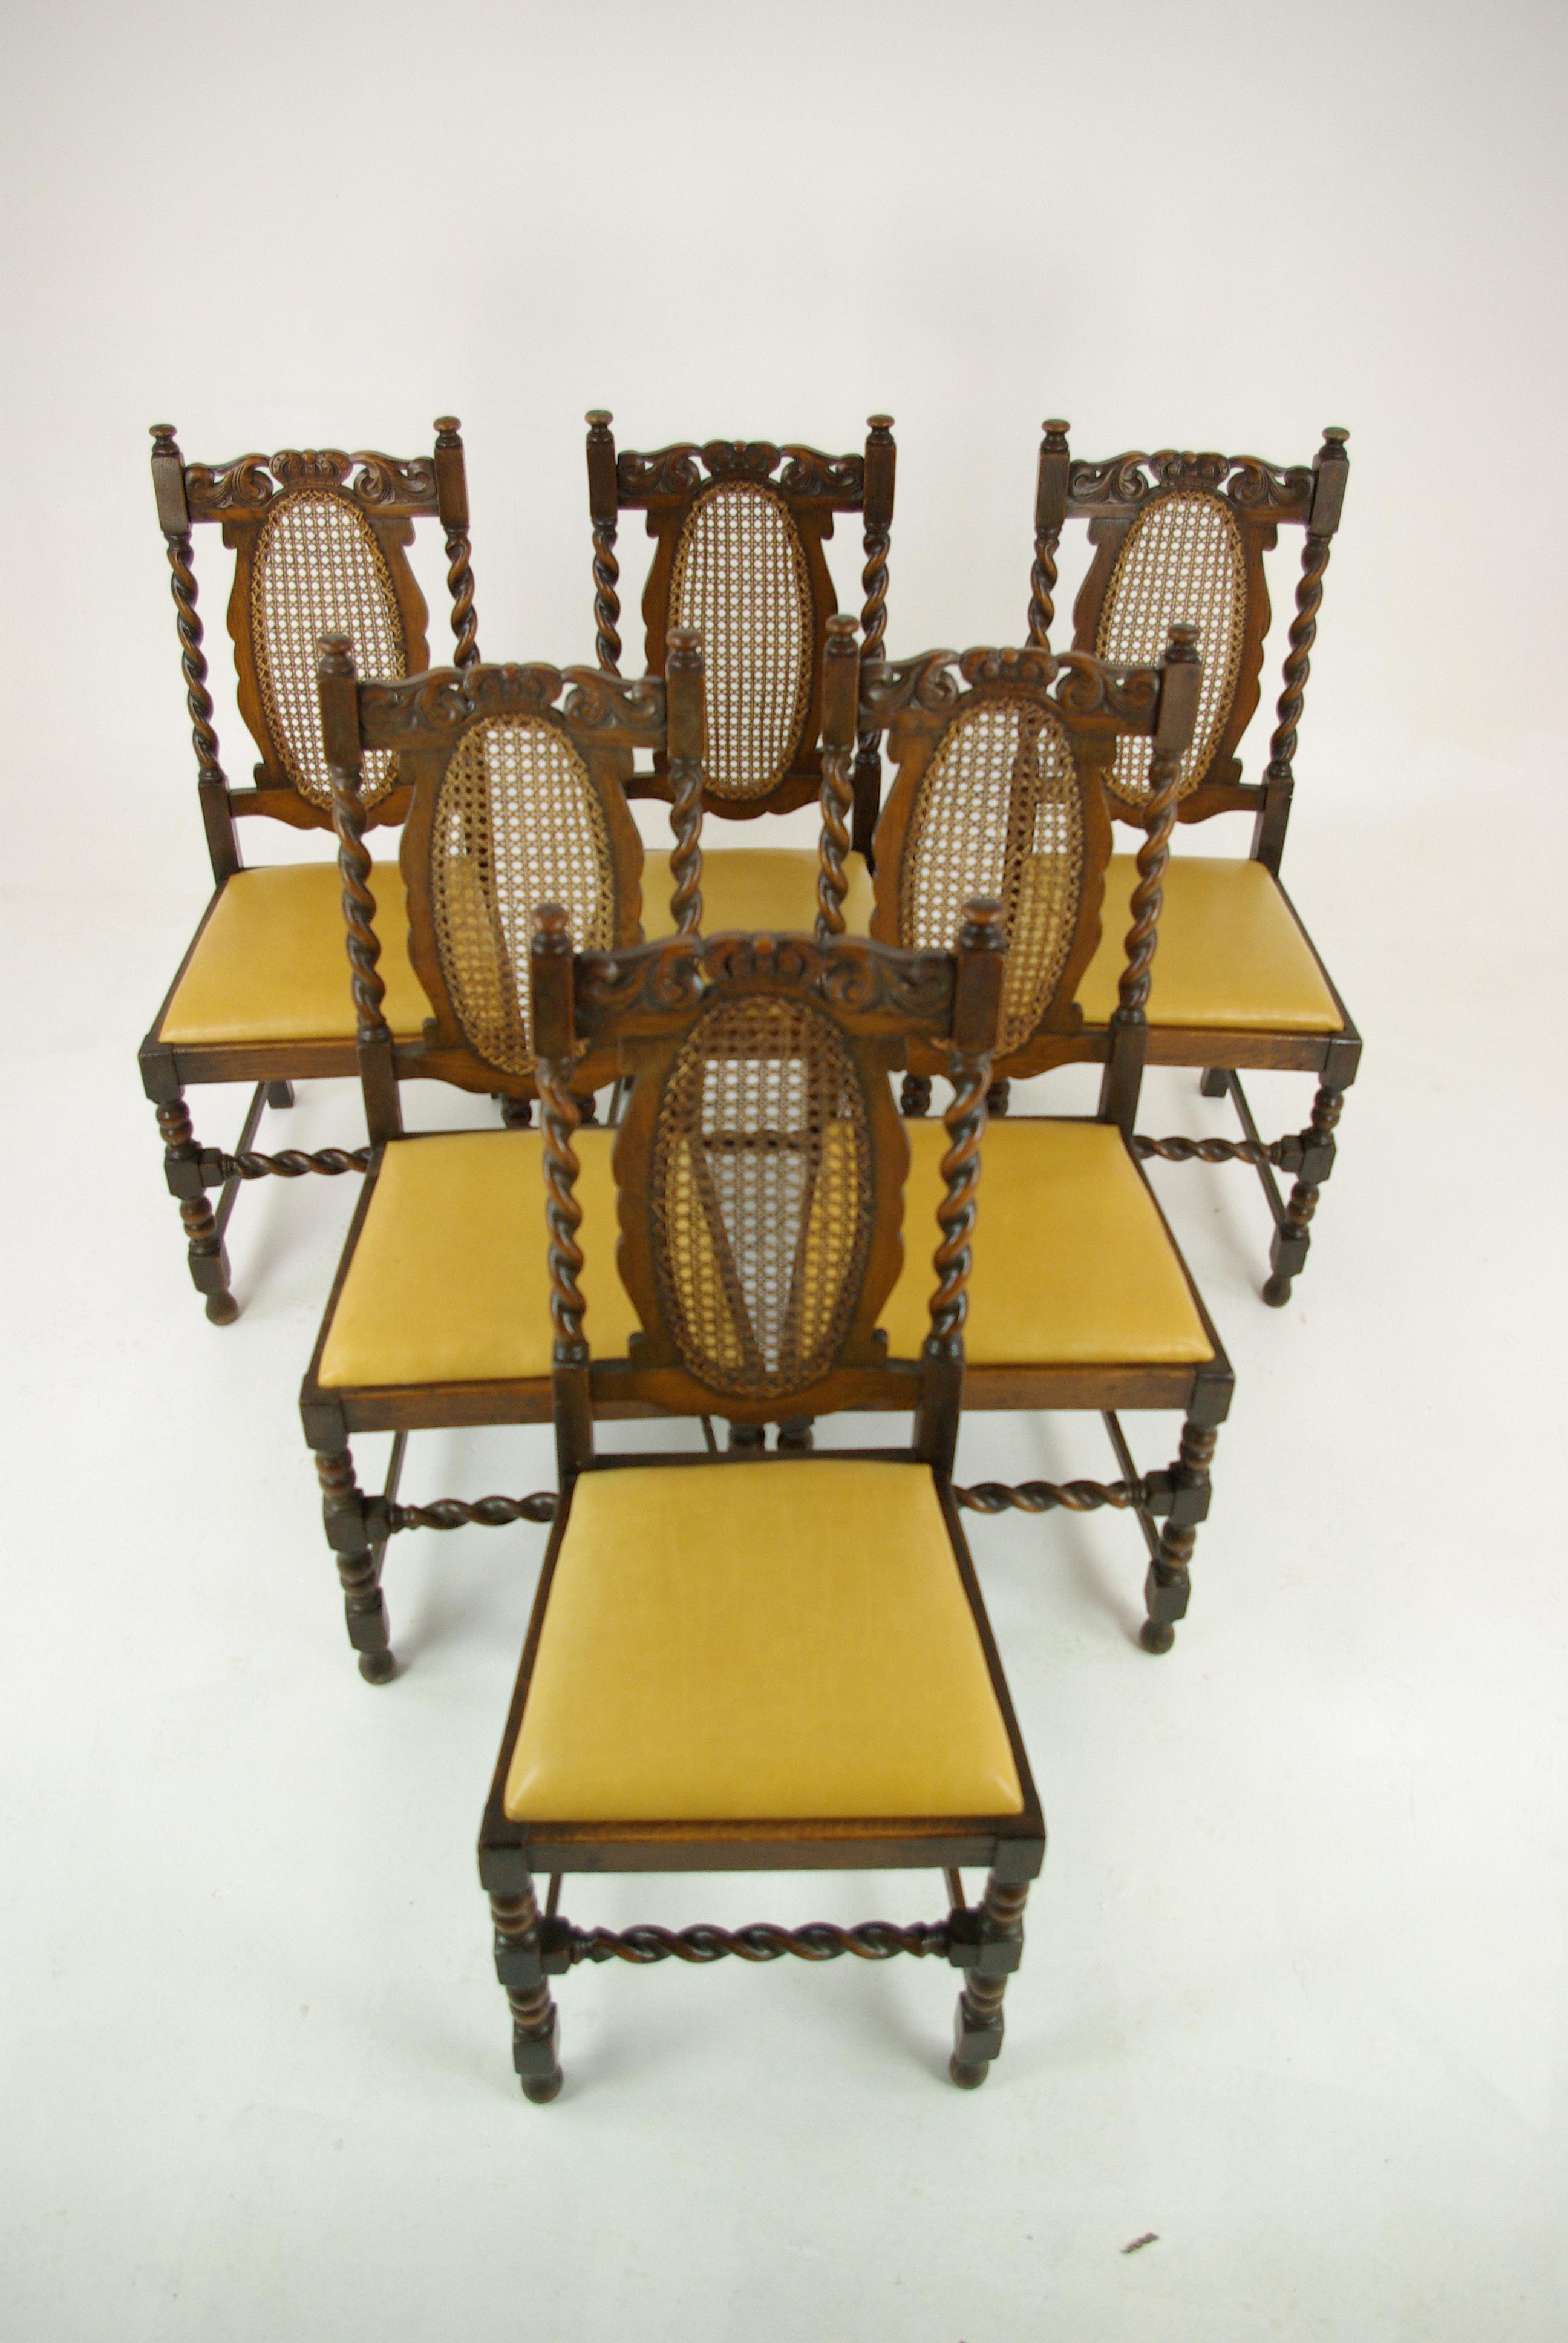 6 oak dining chairs, barley twist chairs, Scotland 1920, antique furniture, B1375

Scotland 1920
Solid oak
Original finish
Carved and shaped back rail
Original oval bergre cane panels in excellent condition
Barley twist supports with turned